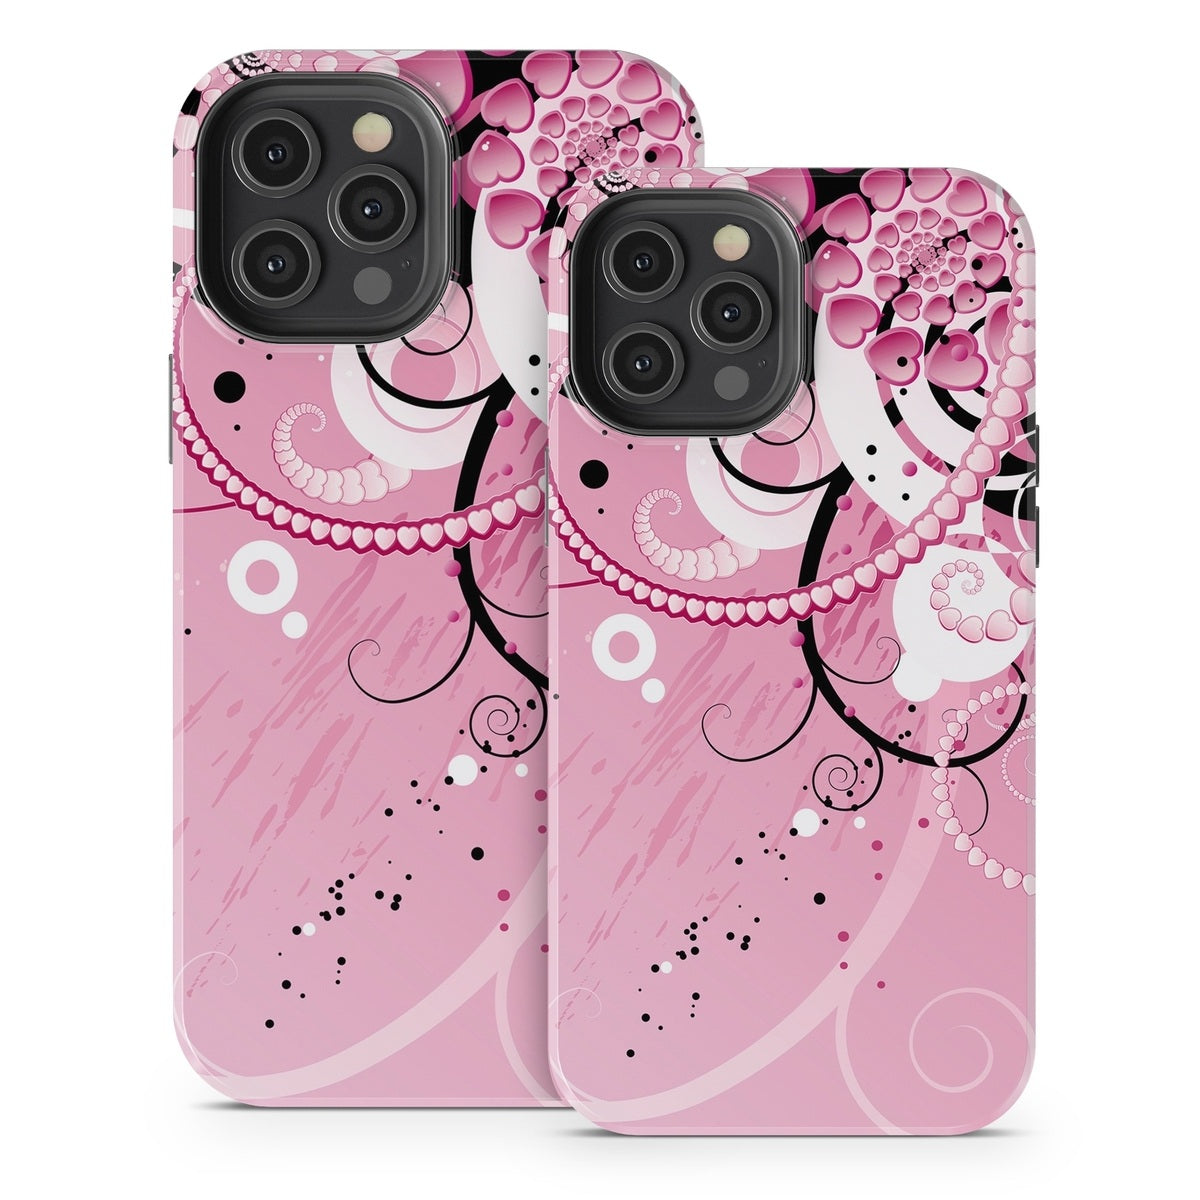 Her Abstraction - Apple iPhone 12 Tough Case